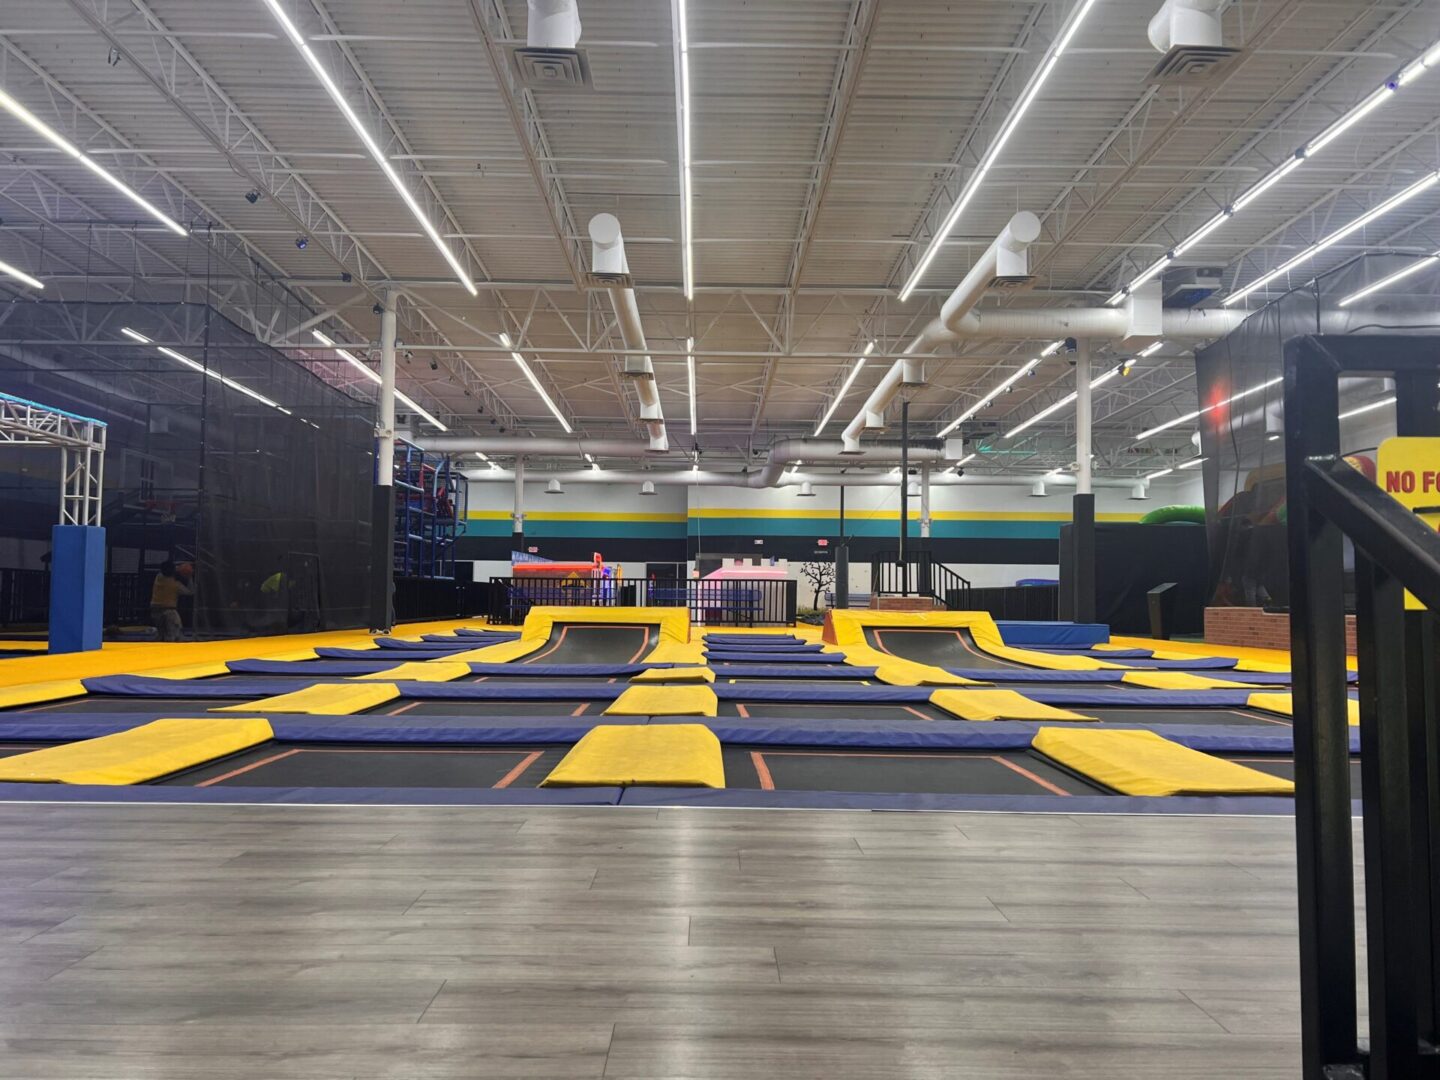 A large indoor trampoline park with many different trampolines.